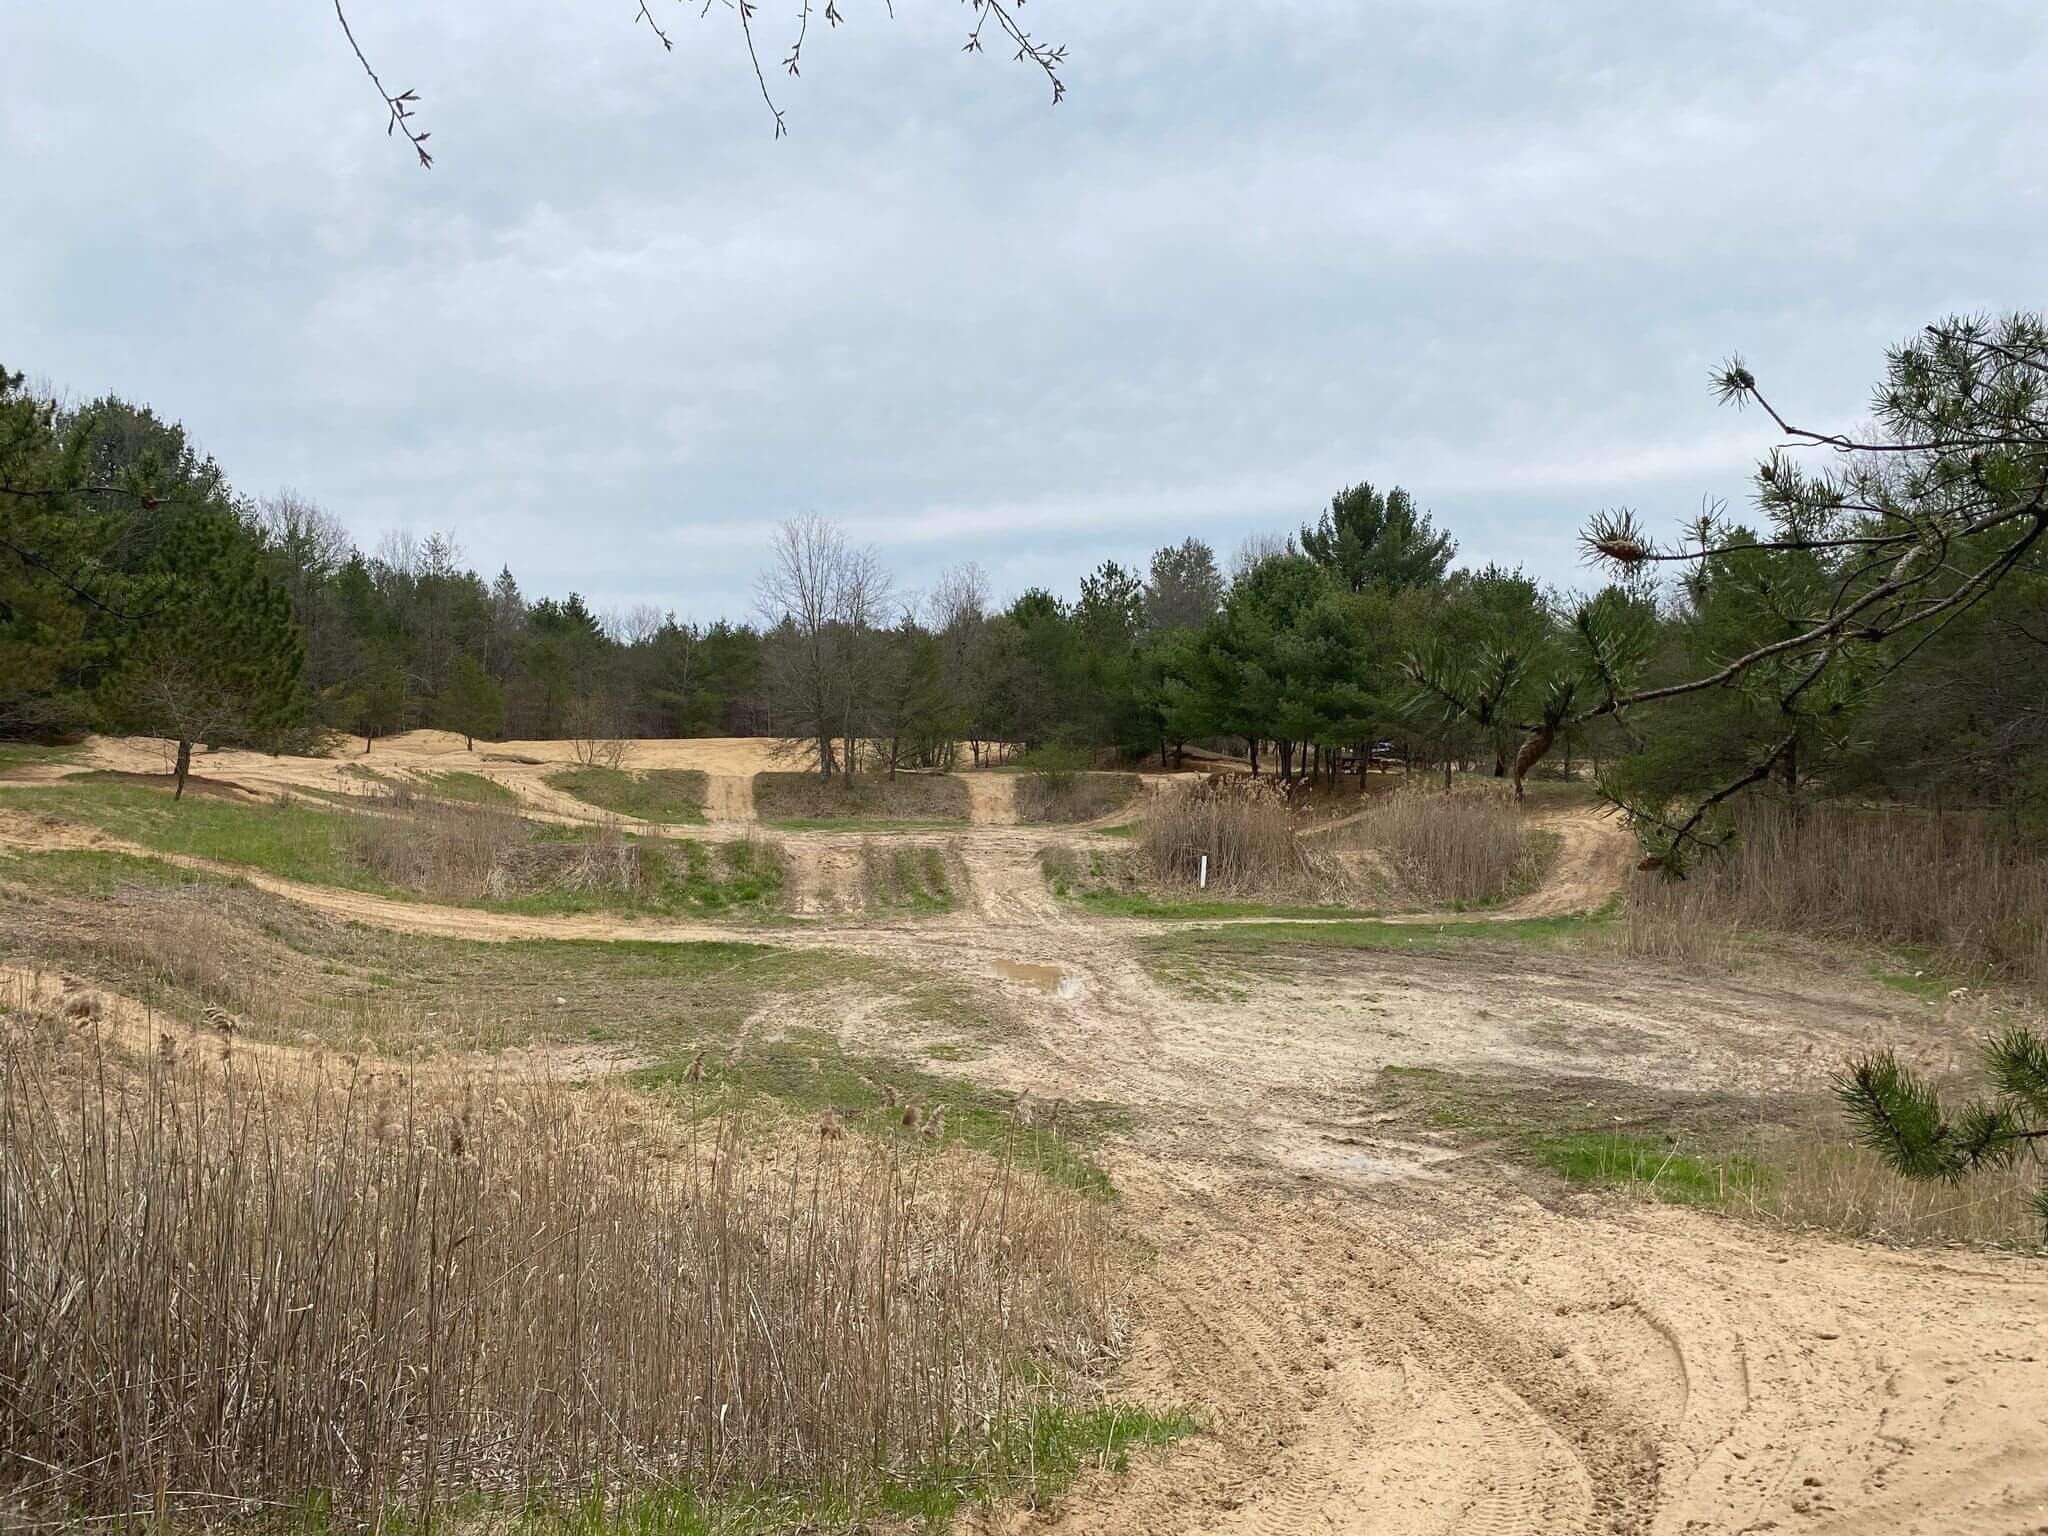 Long shot view of ORV trail proving ground